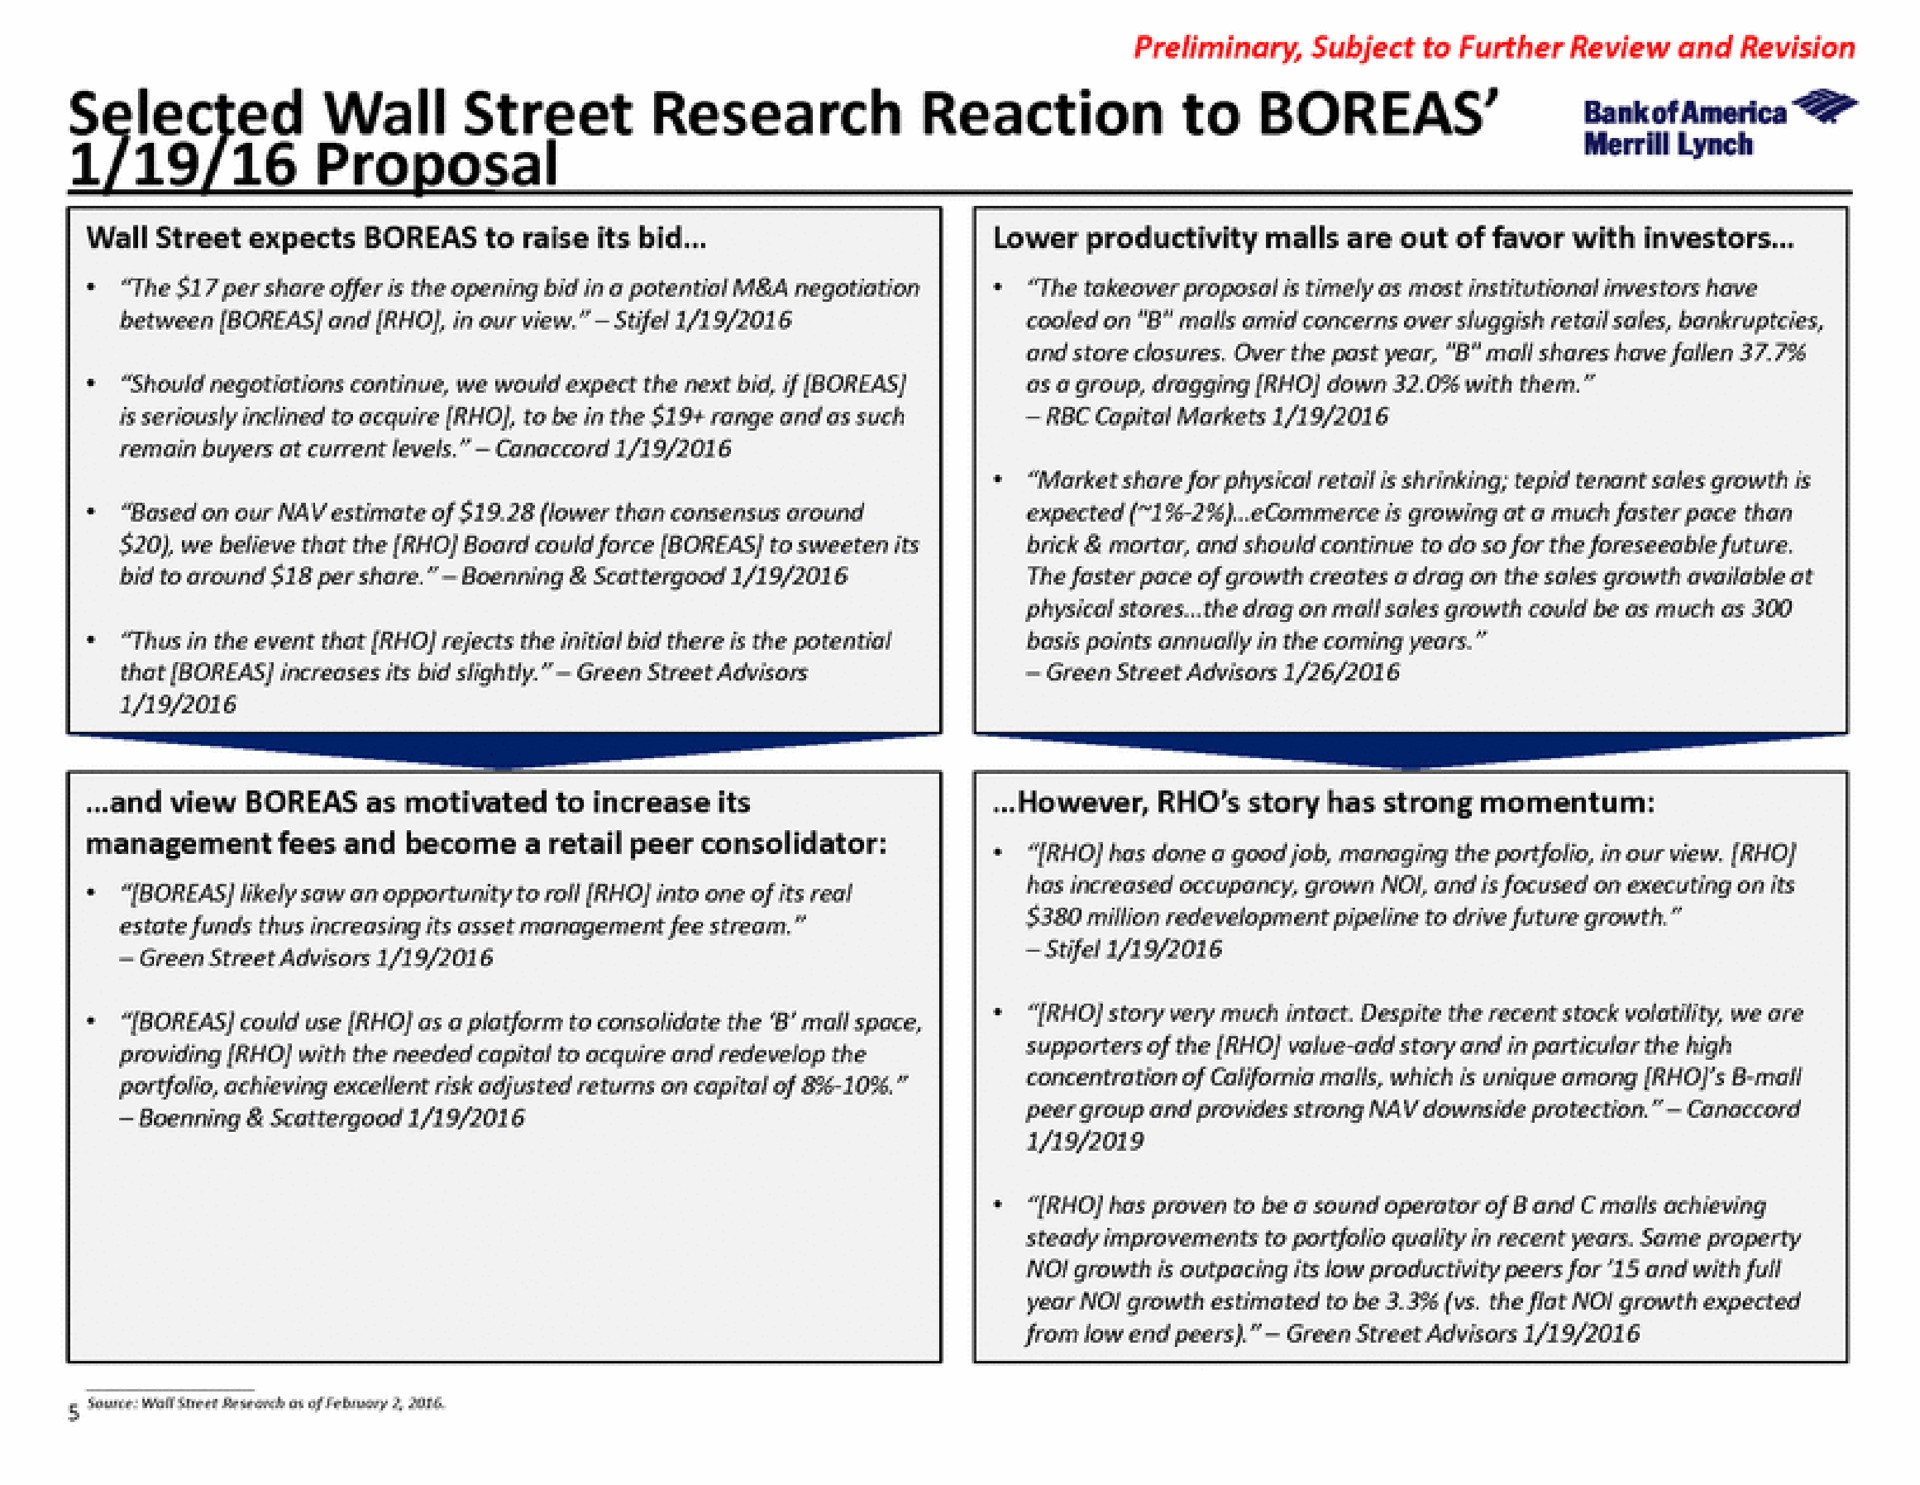 wall street research reaction to proposal | Bank of America